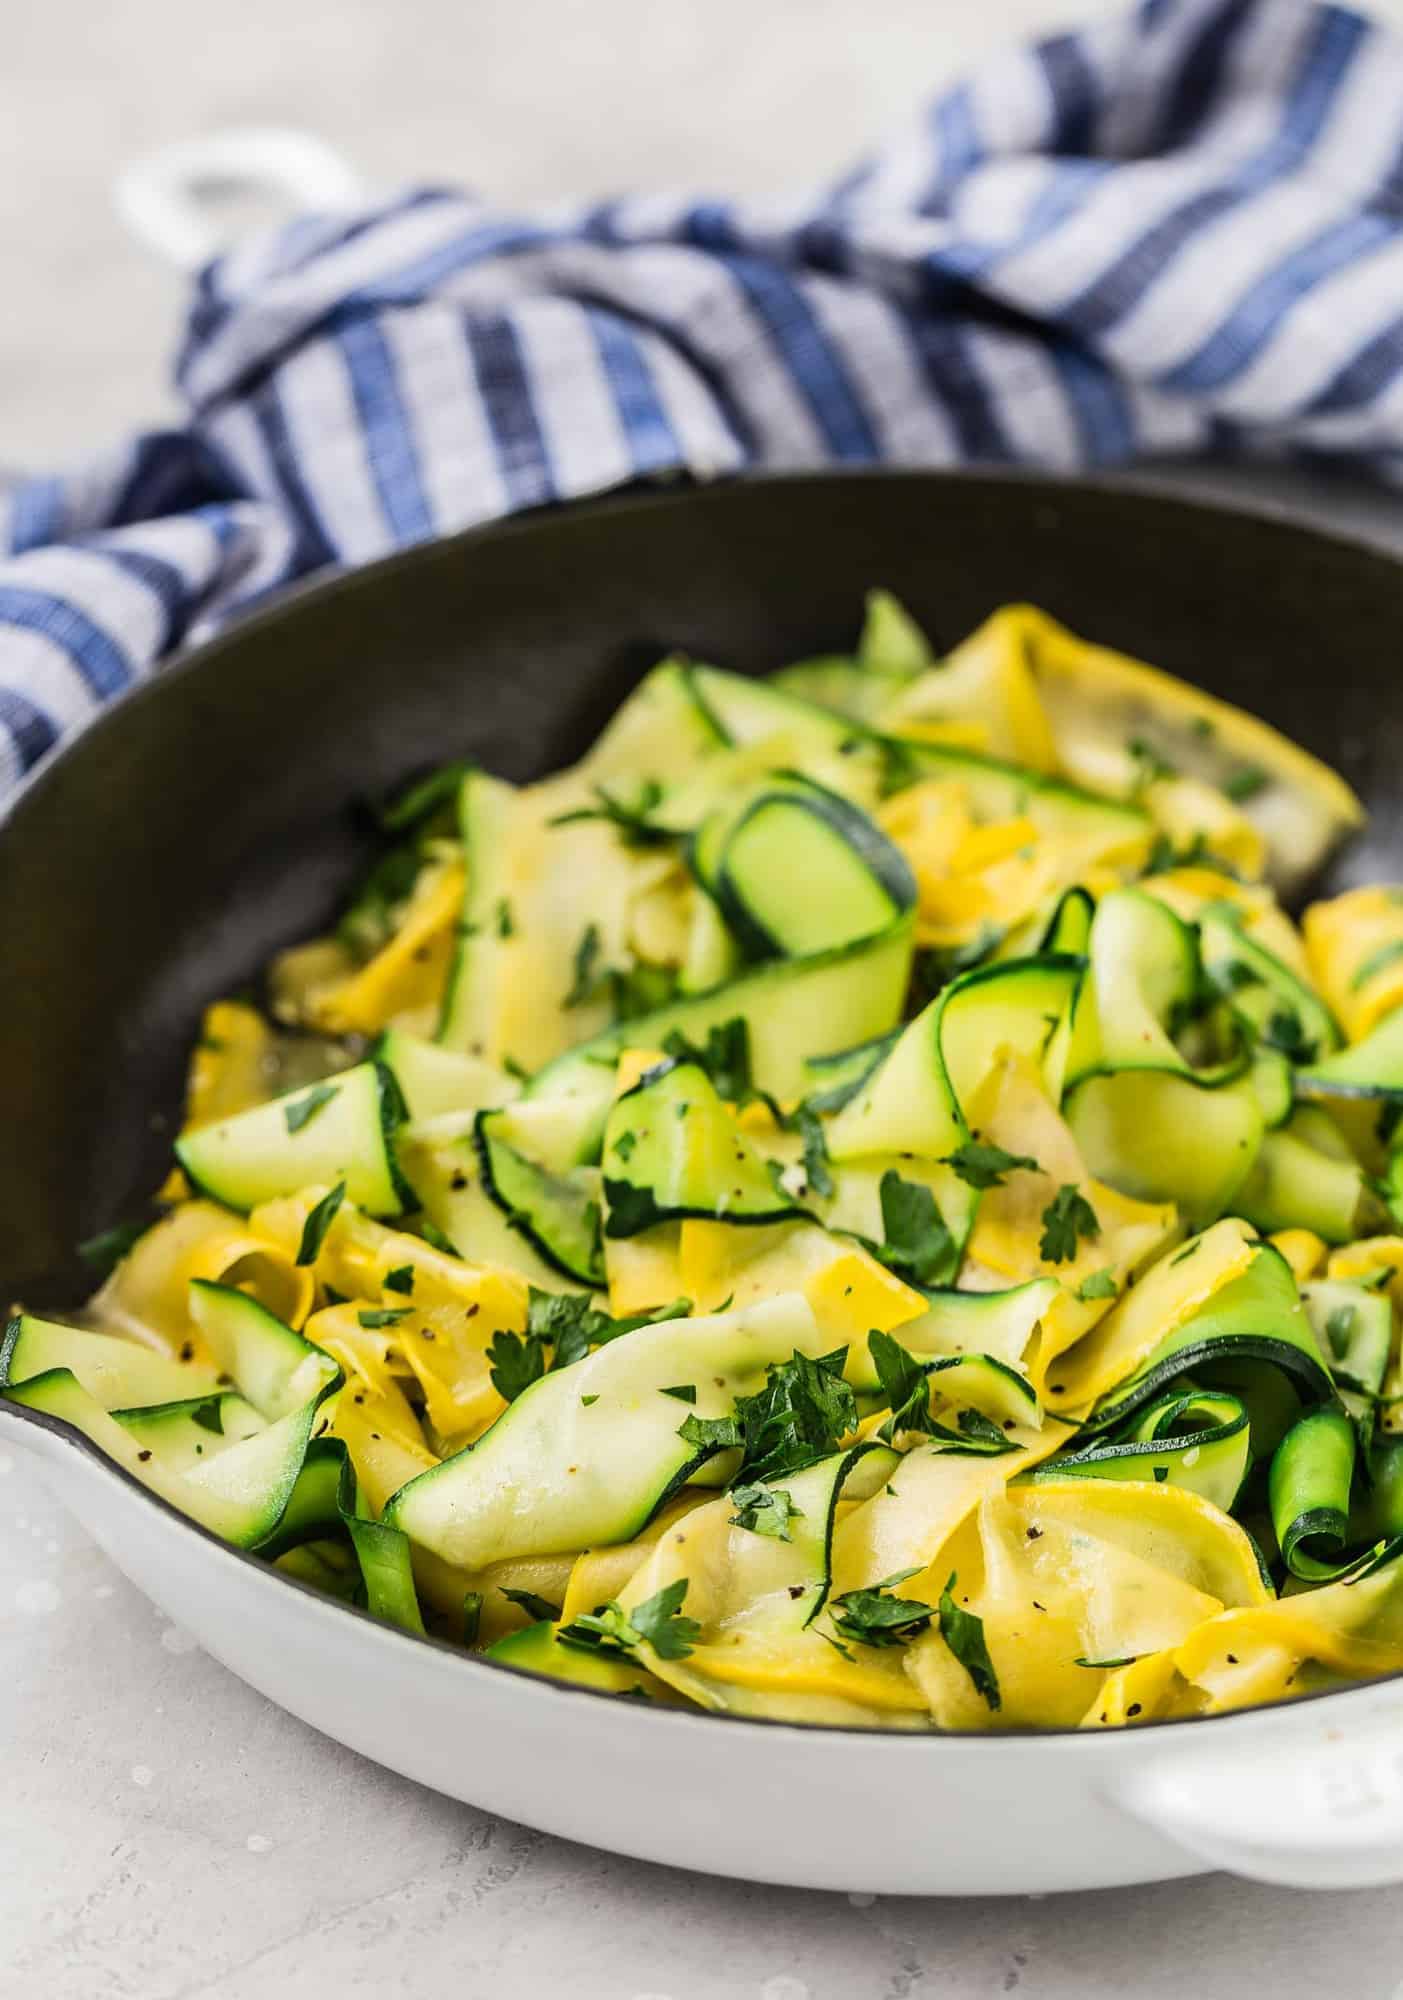 Summer squash and zucchini ribbons in a black and white skillet with a blue and white linen.